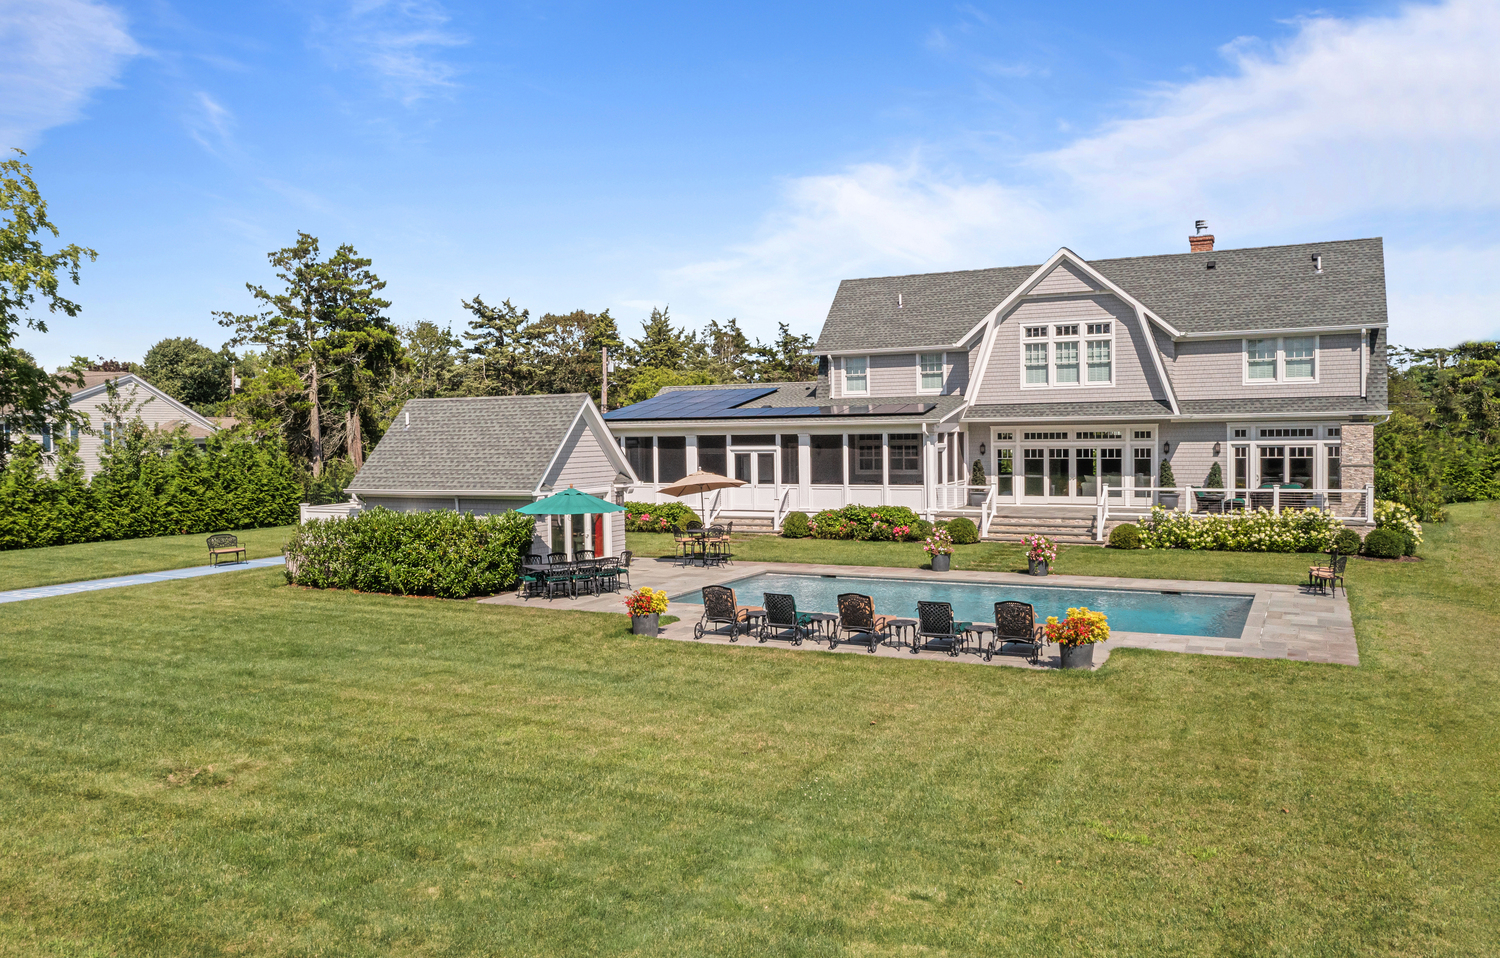 Recently sold at 7 Quogo Neck Lane in Quogue. COURTESY BROWN HARRIS STEVENS